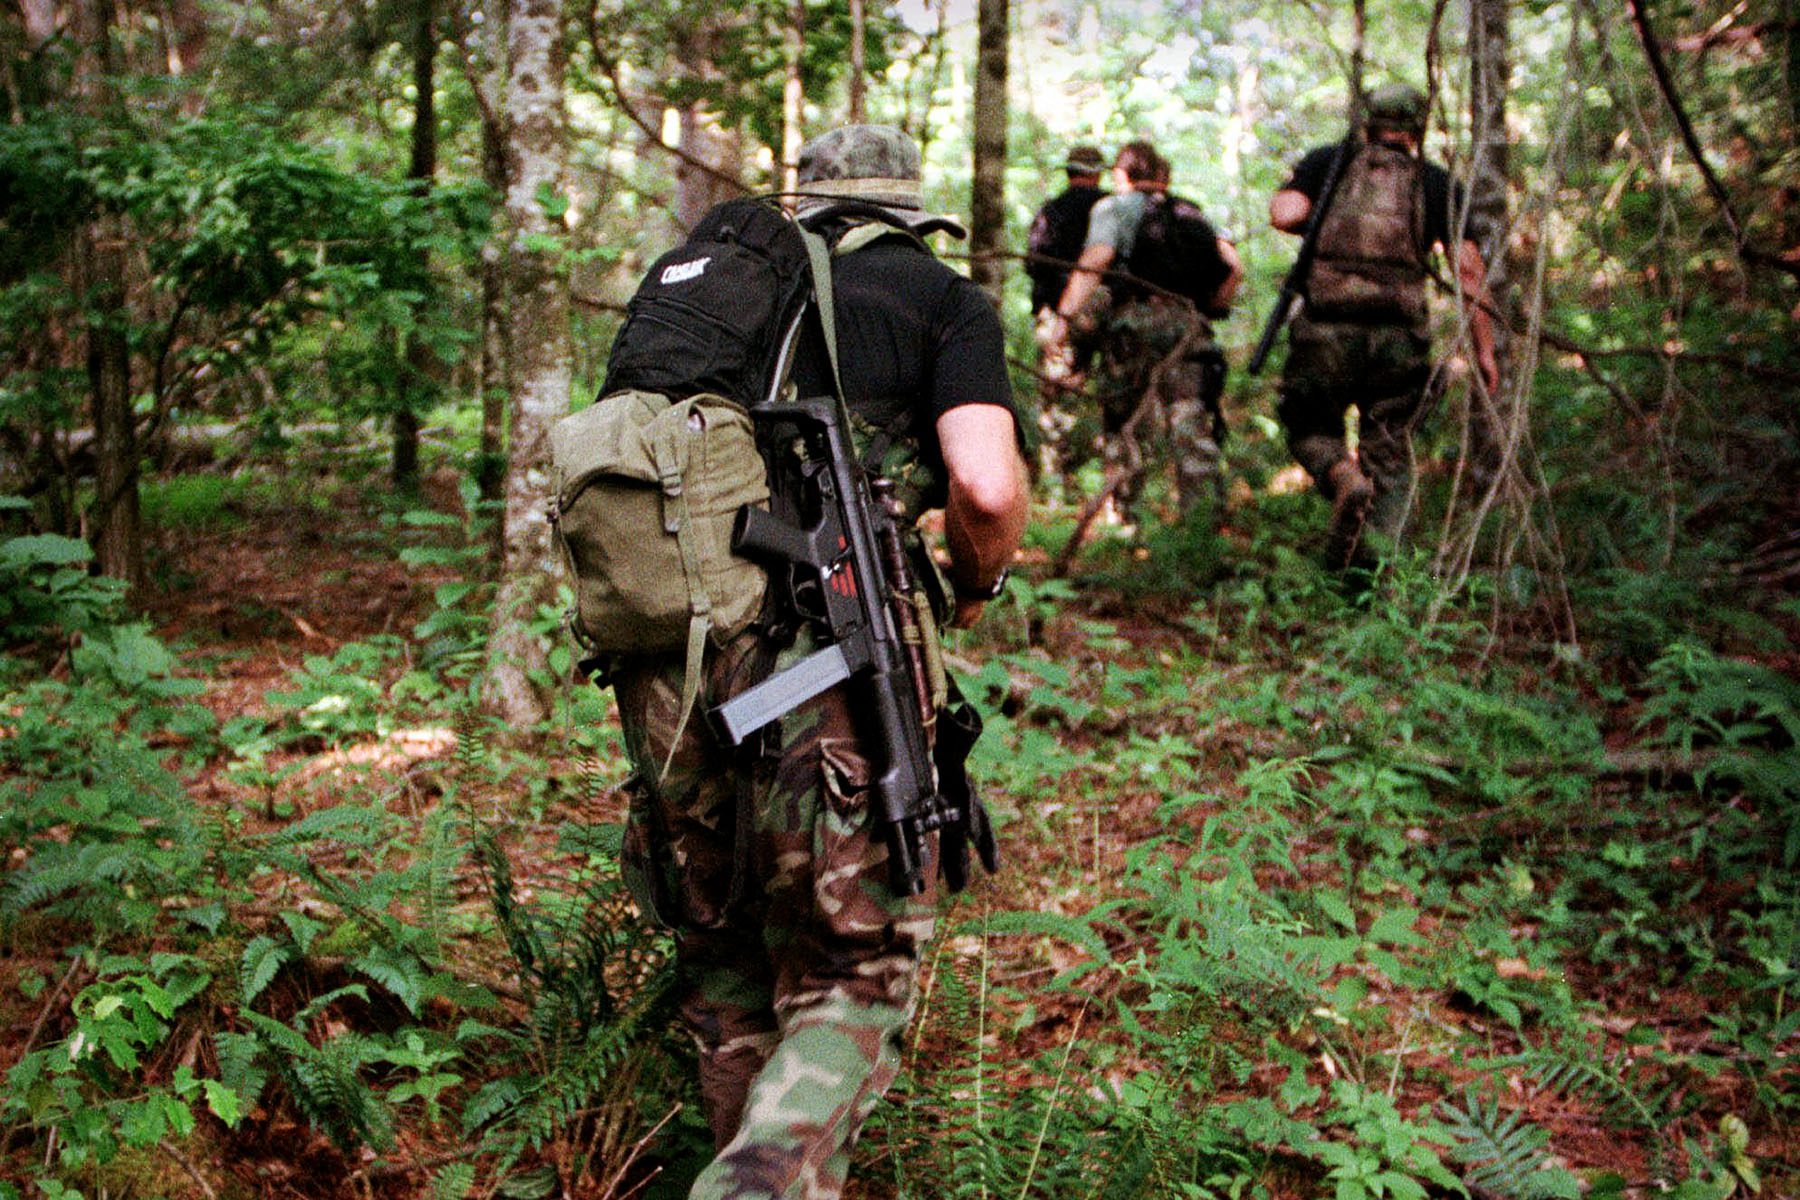 An armed search team enter the forest.